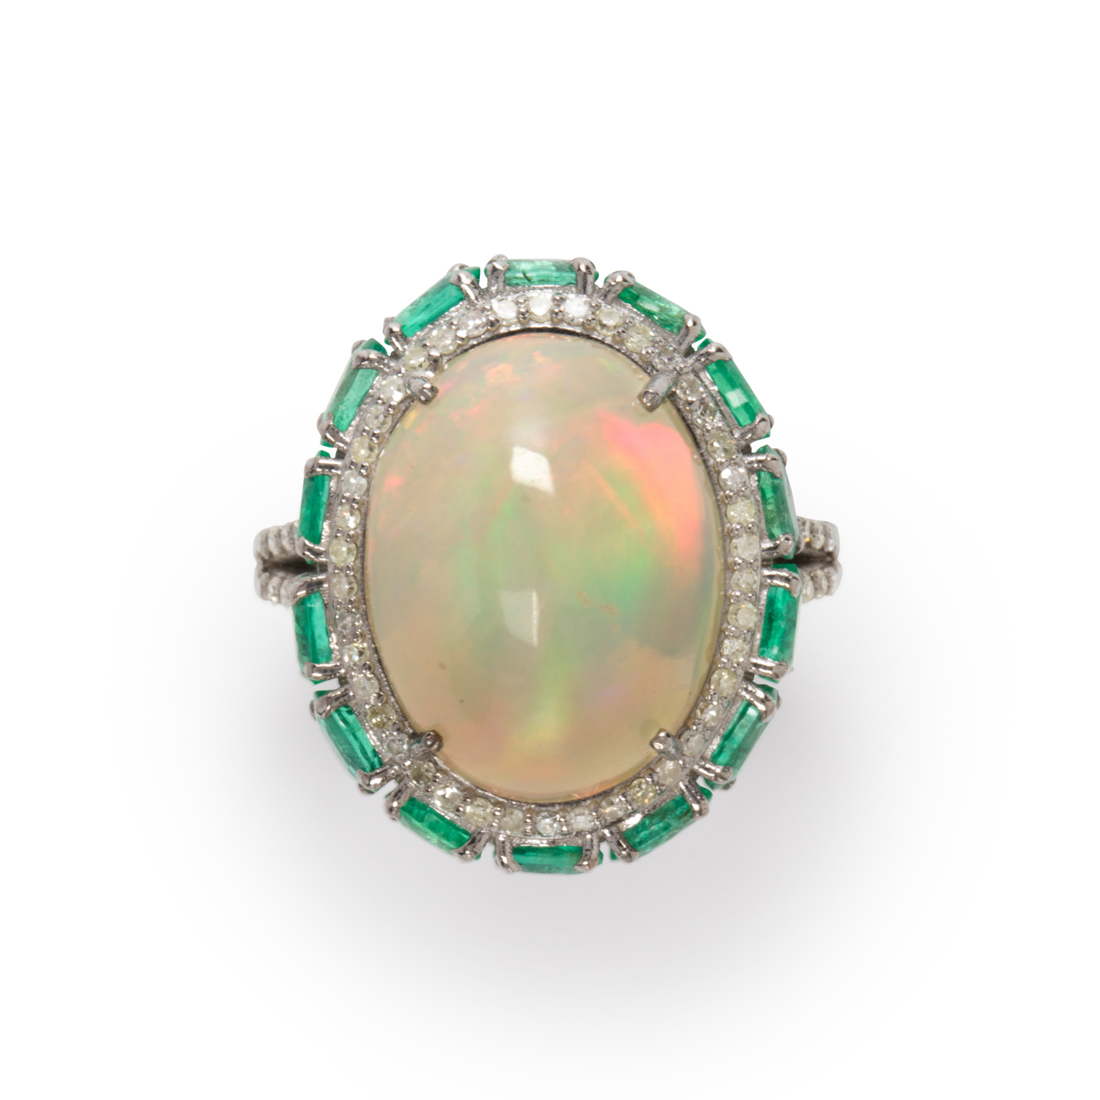 AN OPAL, EMERALD AND DIAMOND RING